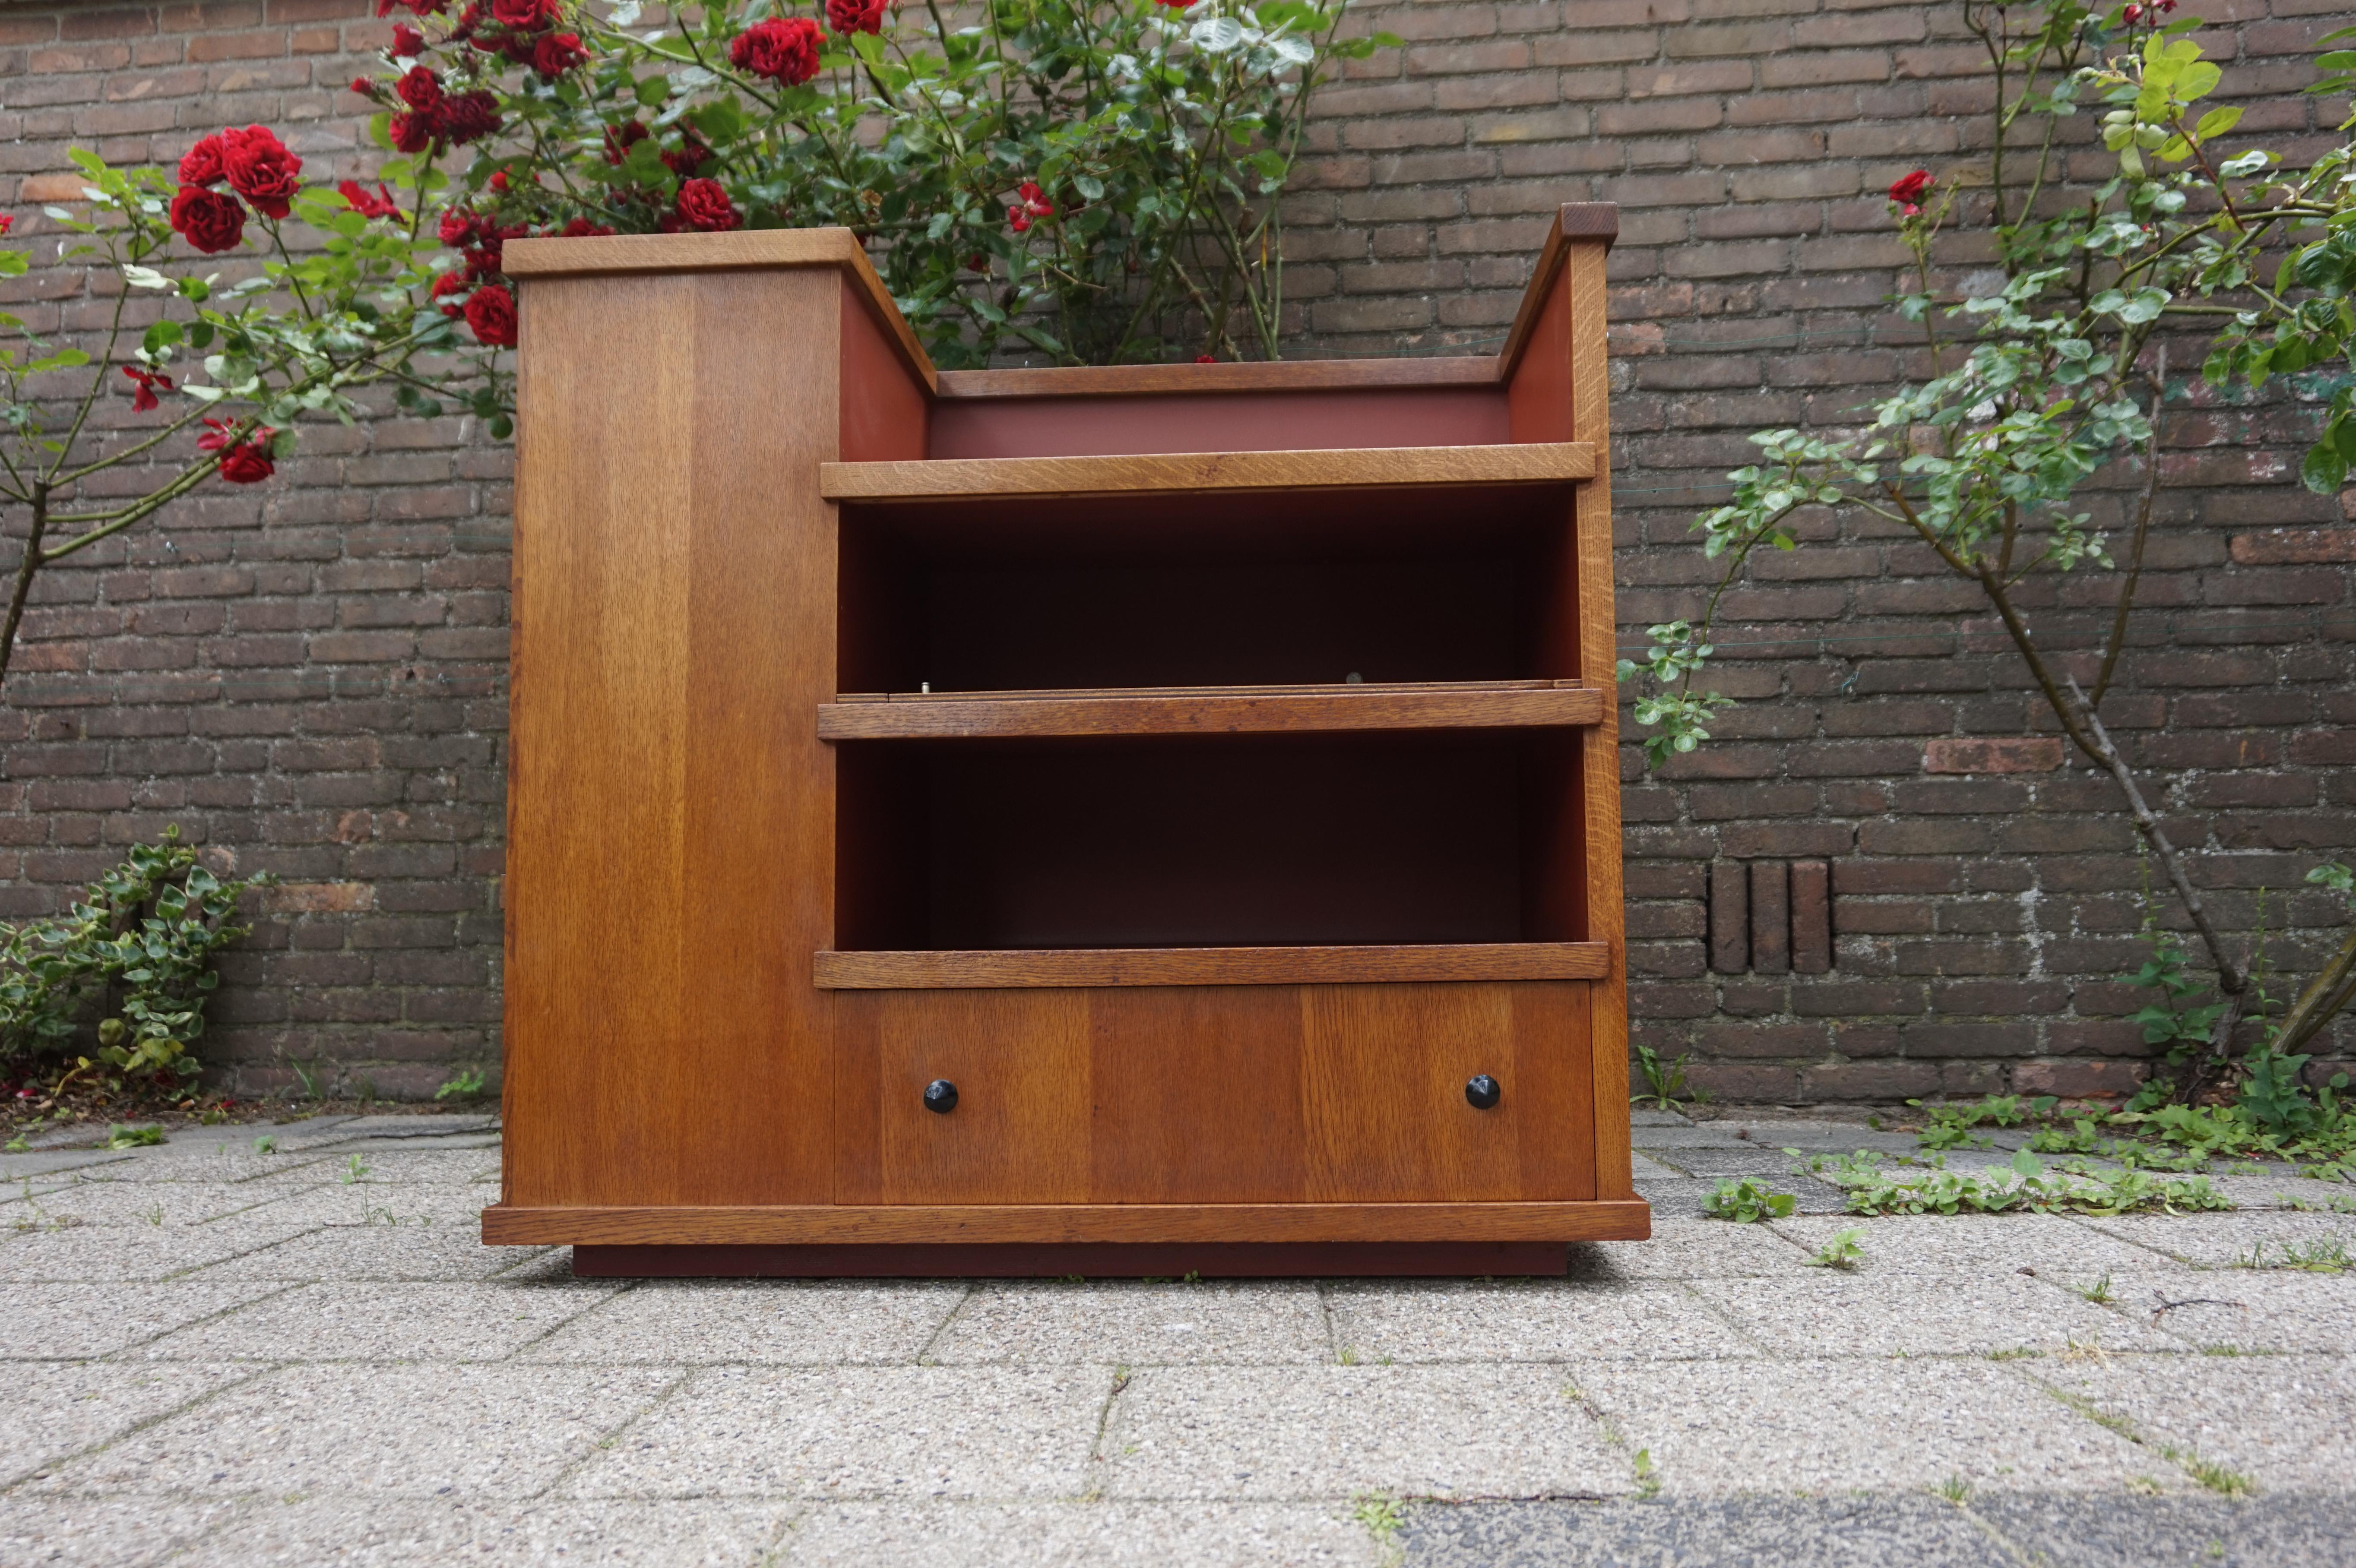 Very stylish Dutch Art Deco design cabinet for all kinds of purposes.

This stunning Dutch cabinet from the 1920s is in very good condition. The rectangular and assymetrical design is an absolute joy to look at and the green and terracotta red